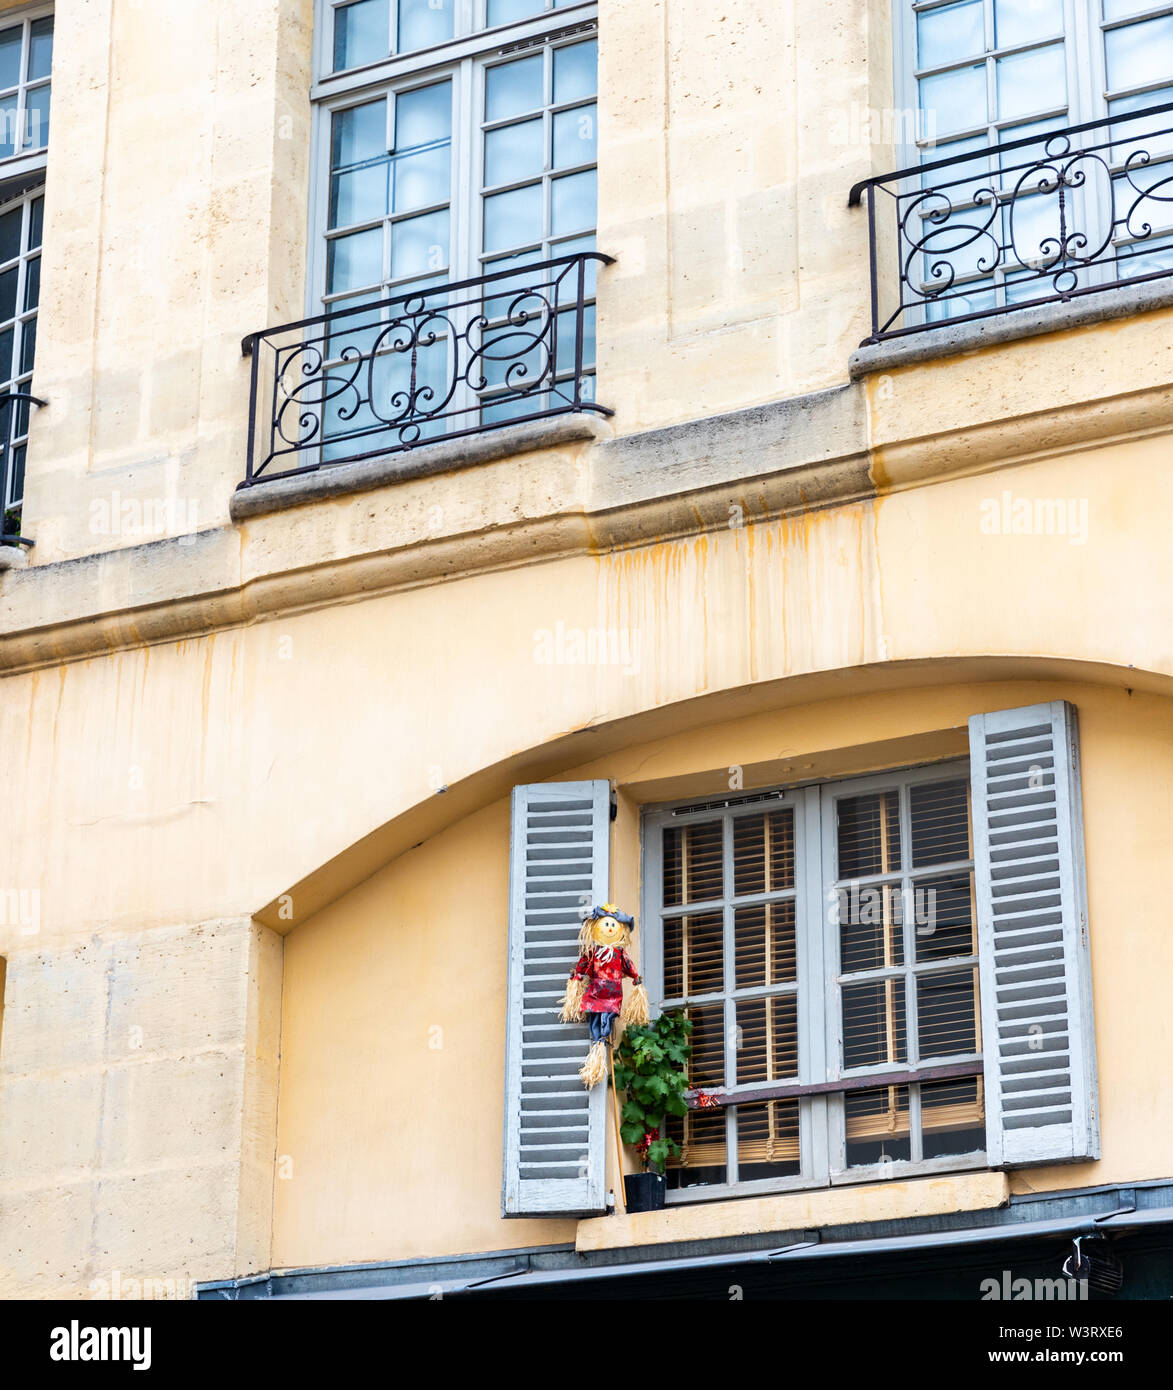 Paris, France, doll and flowers decoration in window with shutters Stock Photo